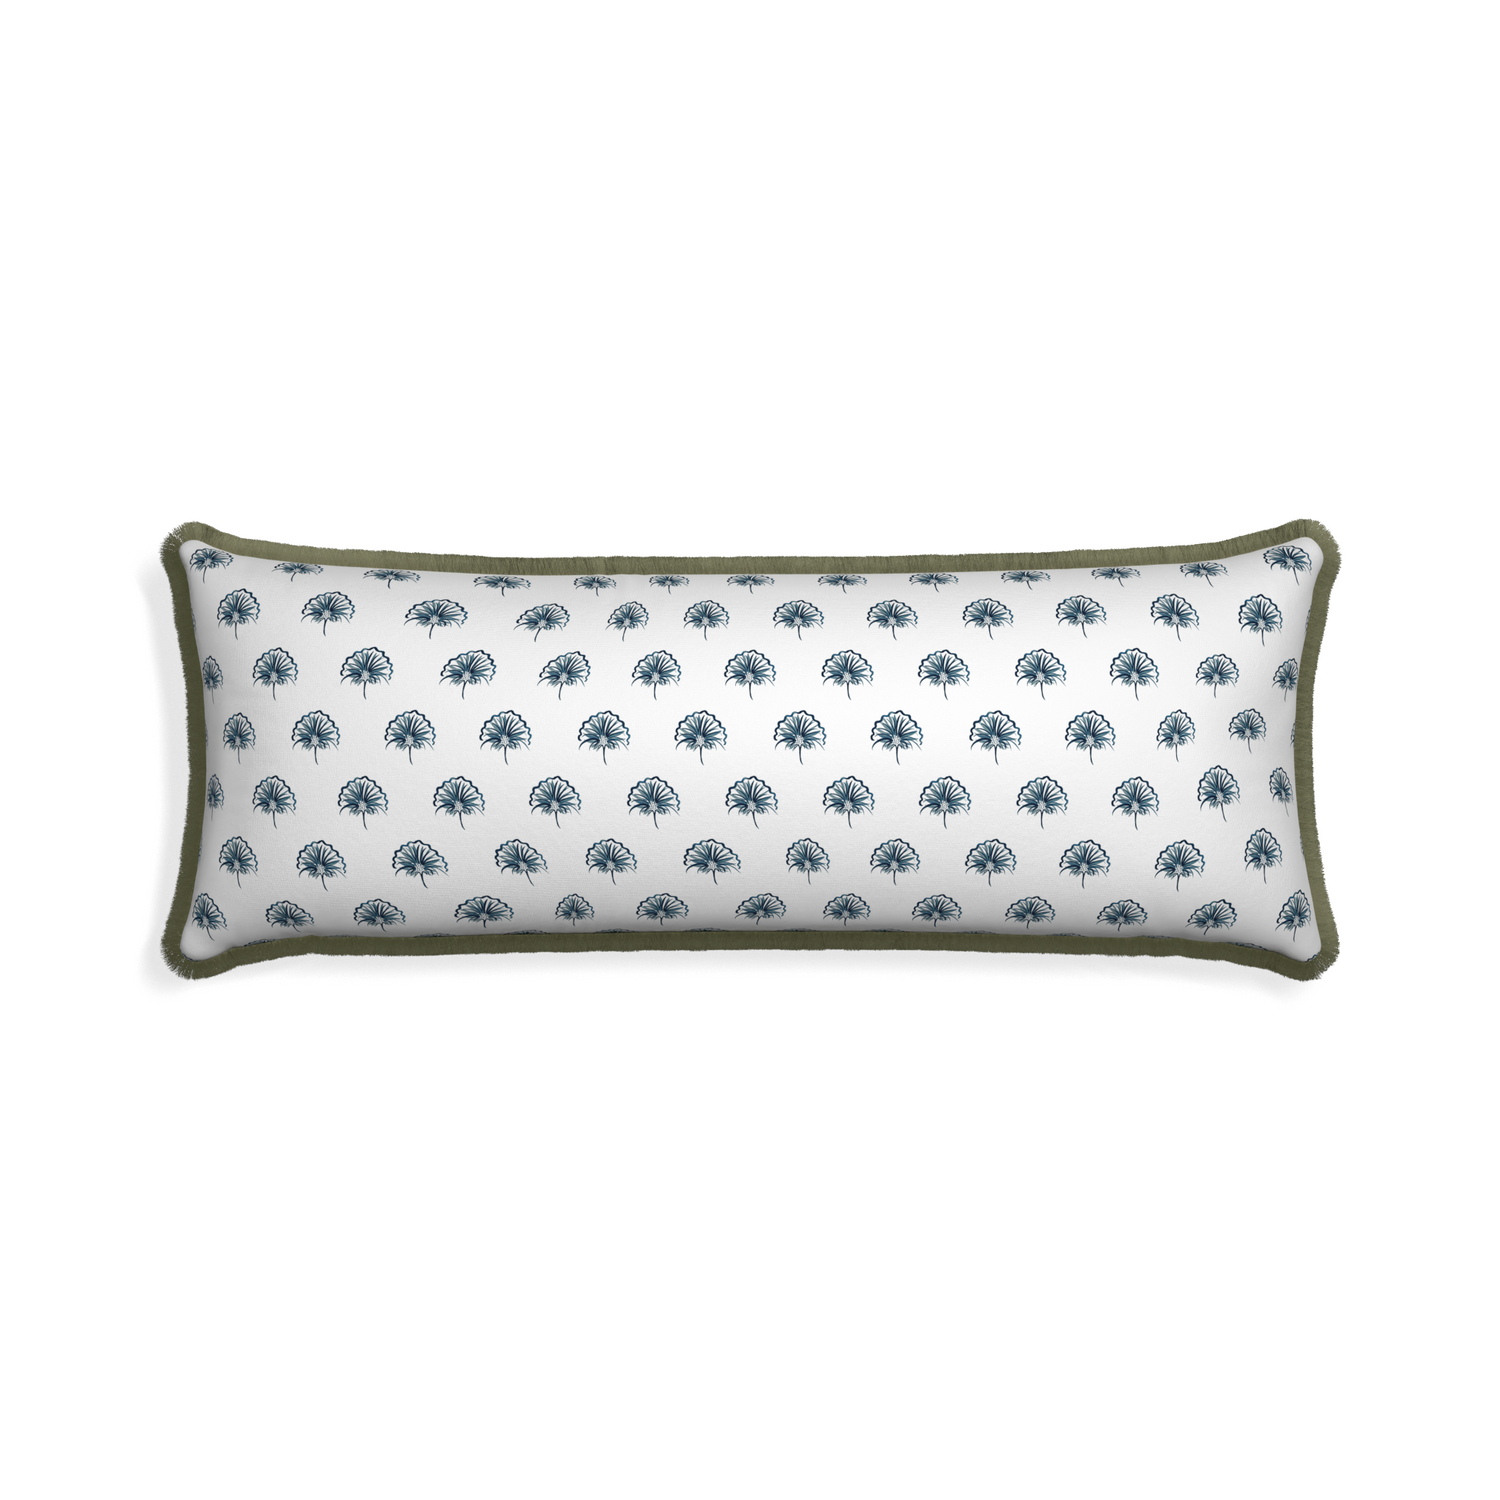 Xl-lumbar penelope midnight custom floral navypillow with sage fringe on white background